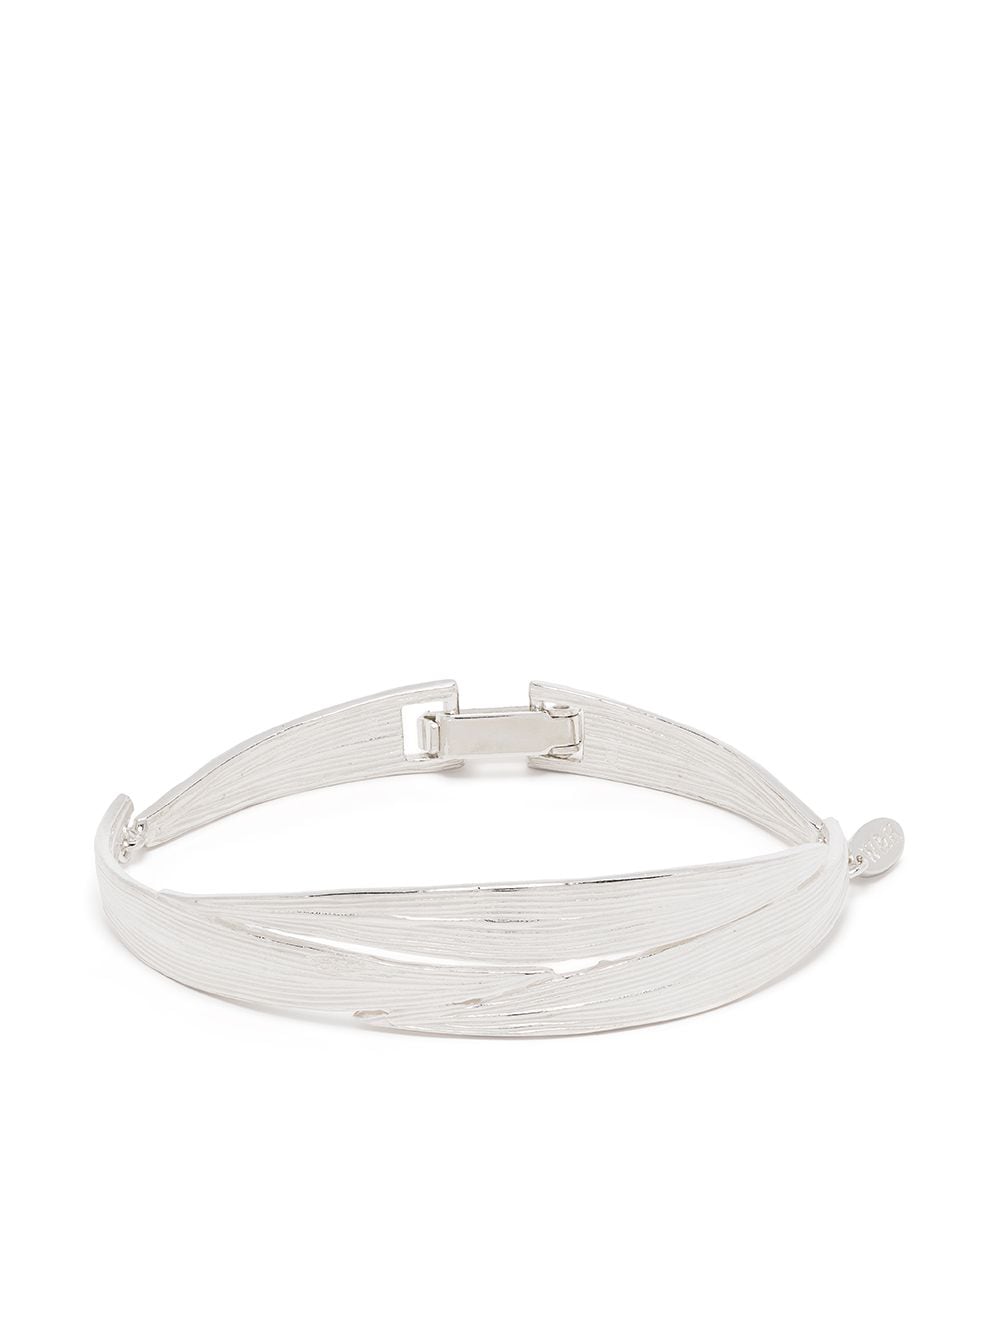 Wouters & Hendrix Voyages Naturalistes bamboo leaf bracelet - Silver von Wouters & Hendrix